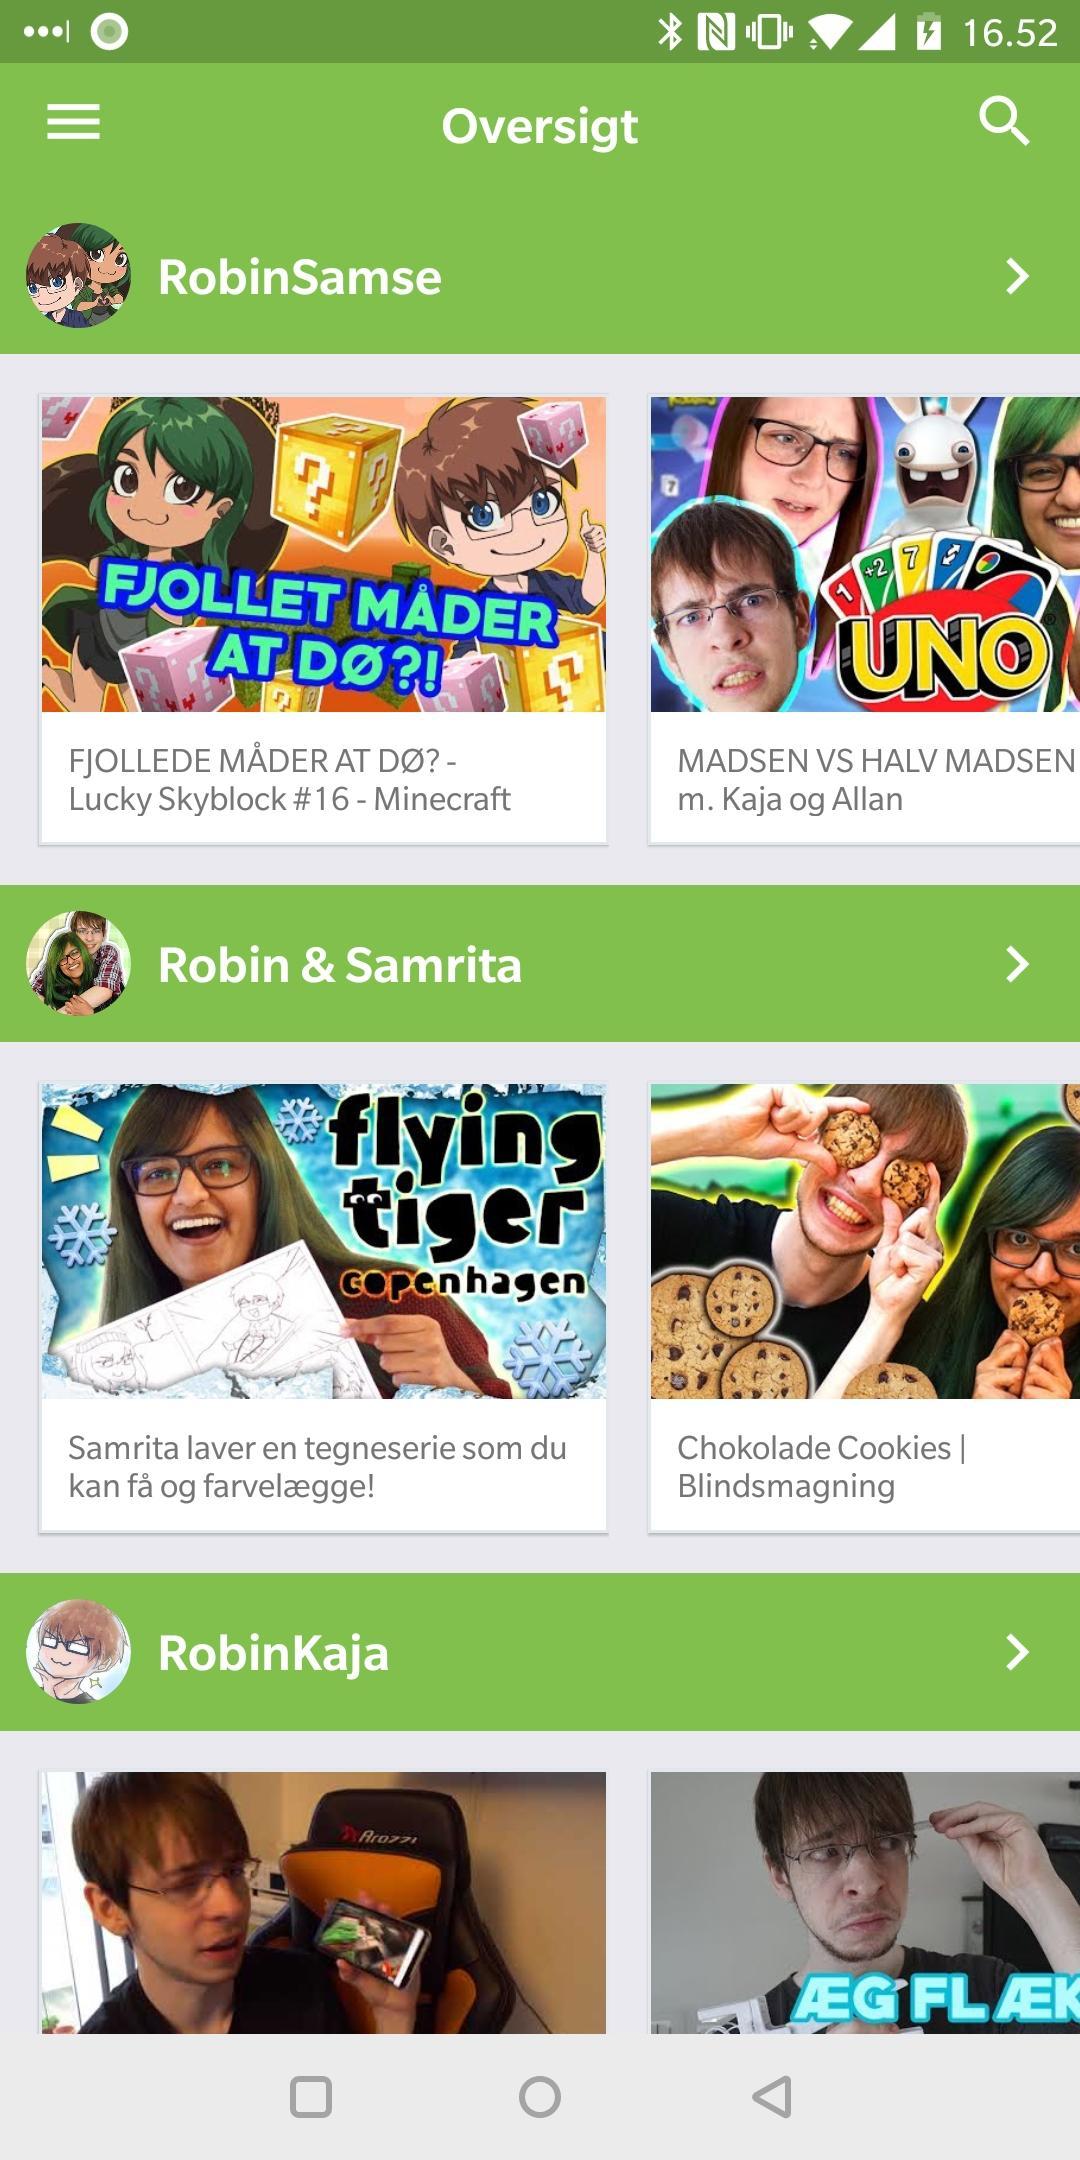 RobinSamse for Android - APK Download